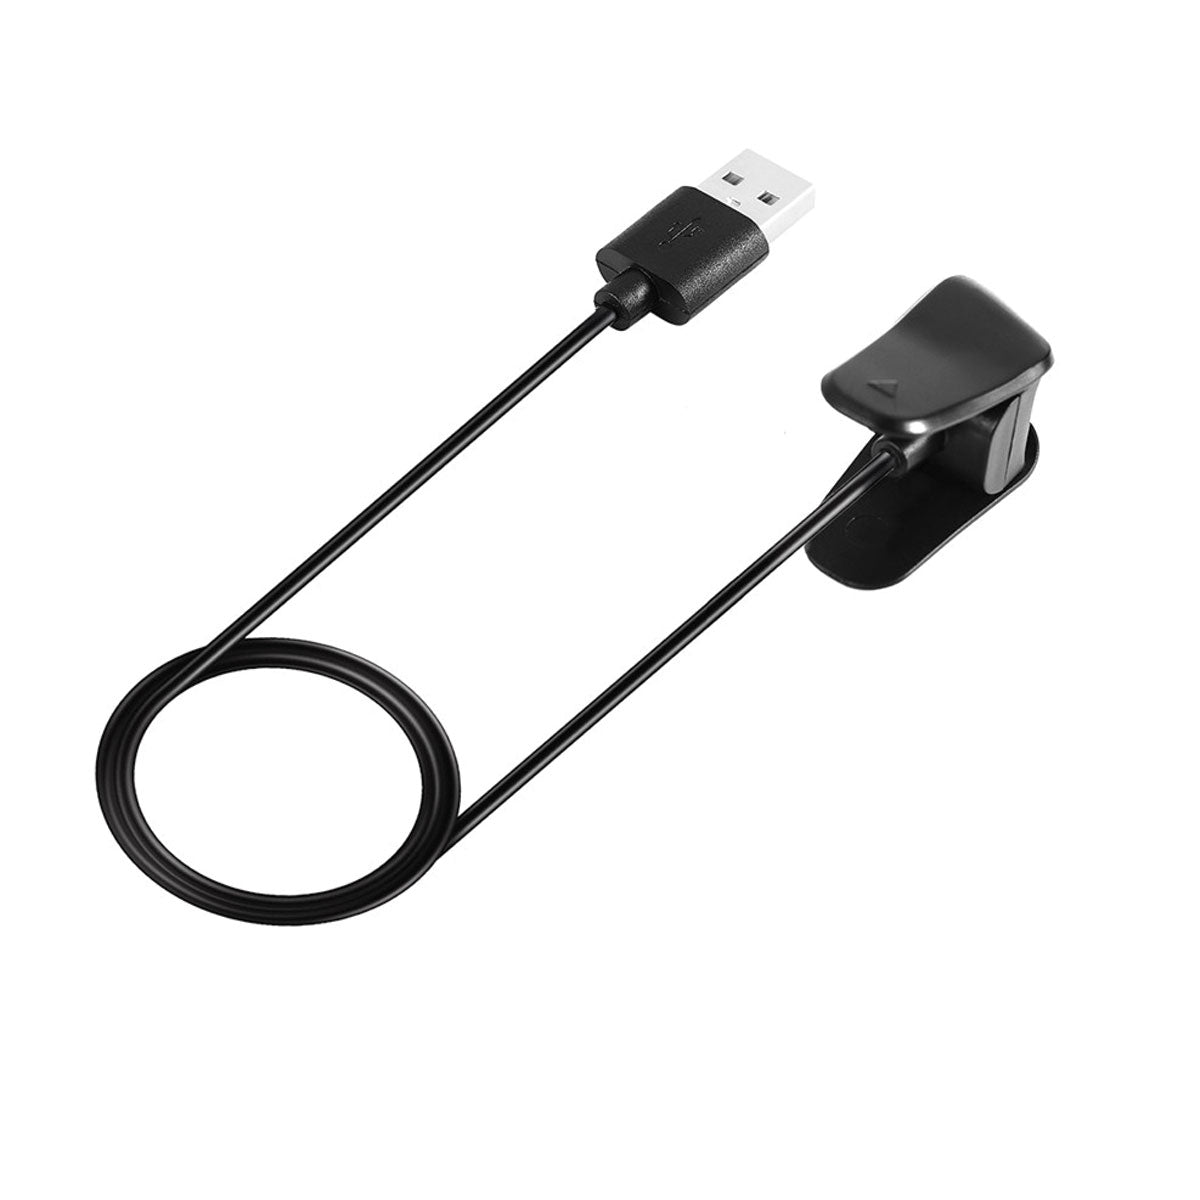 Garmin Vivoactive 4 Charger Replacement Charging Charge Cable Cord USB  (Black)